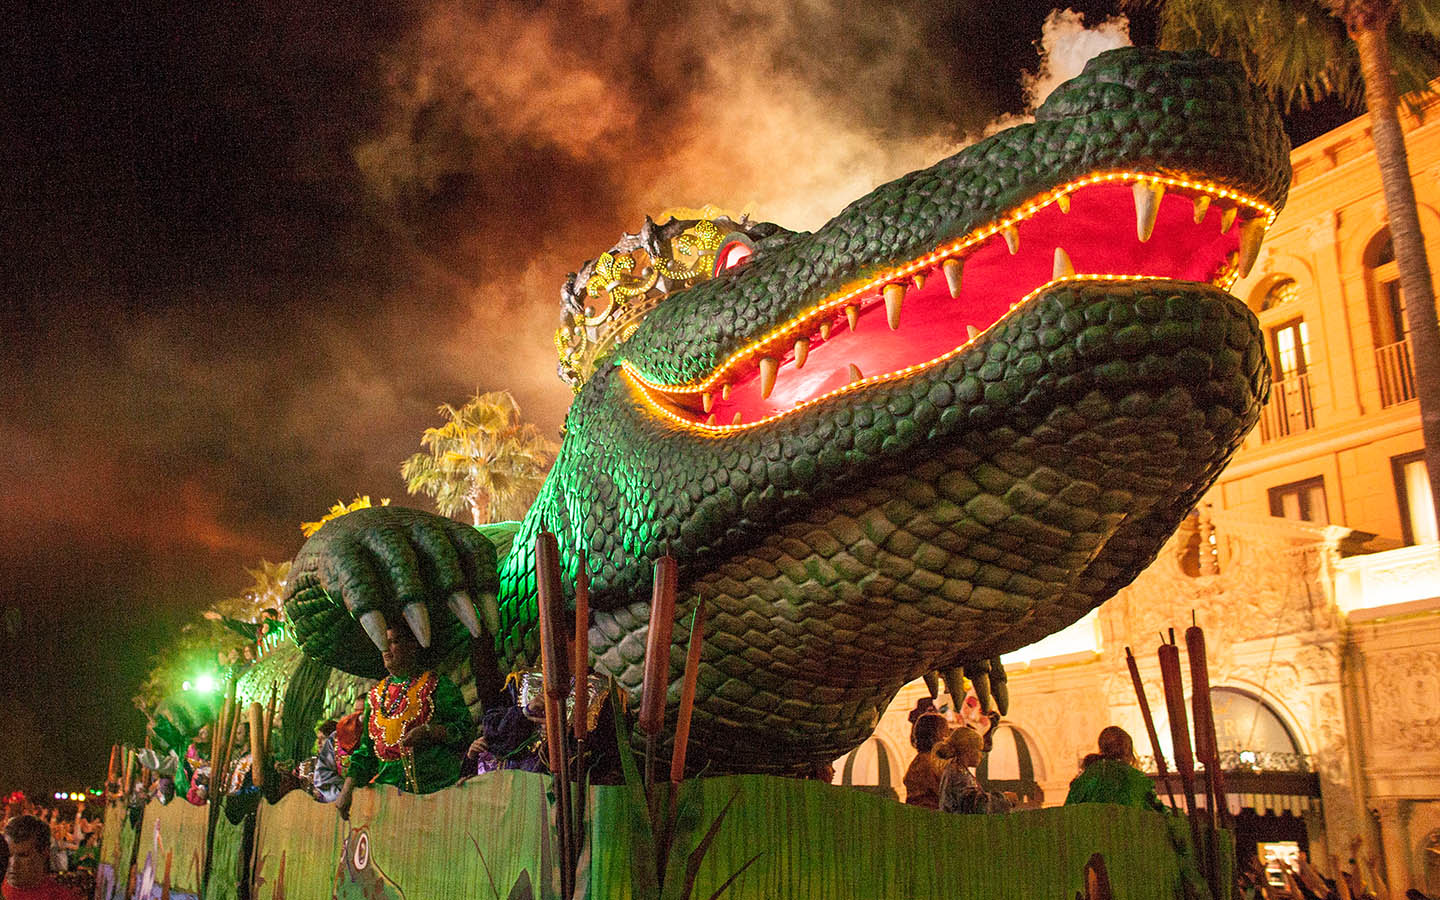 The King Gator float is one of the iconic floats from Universal Orlando's Mardi Gras celebration.